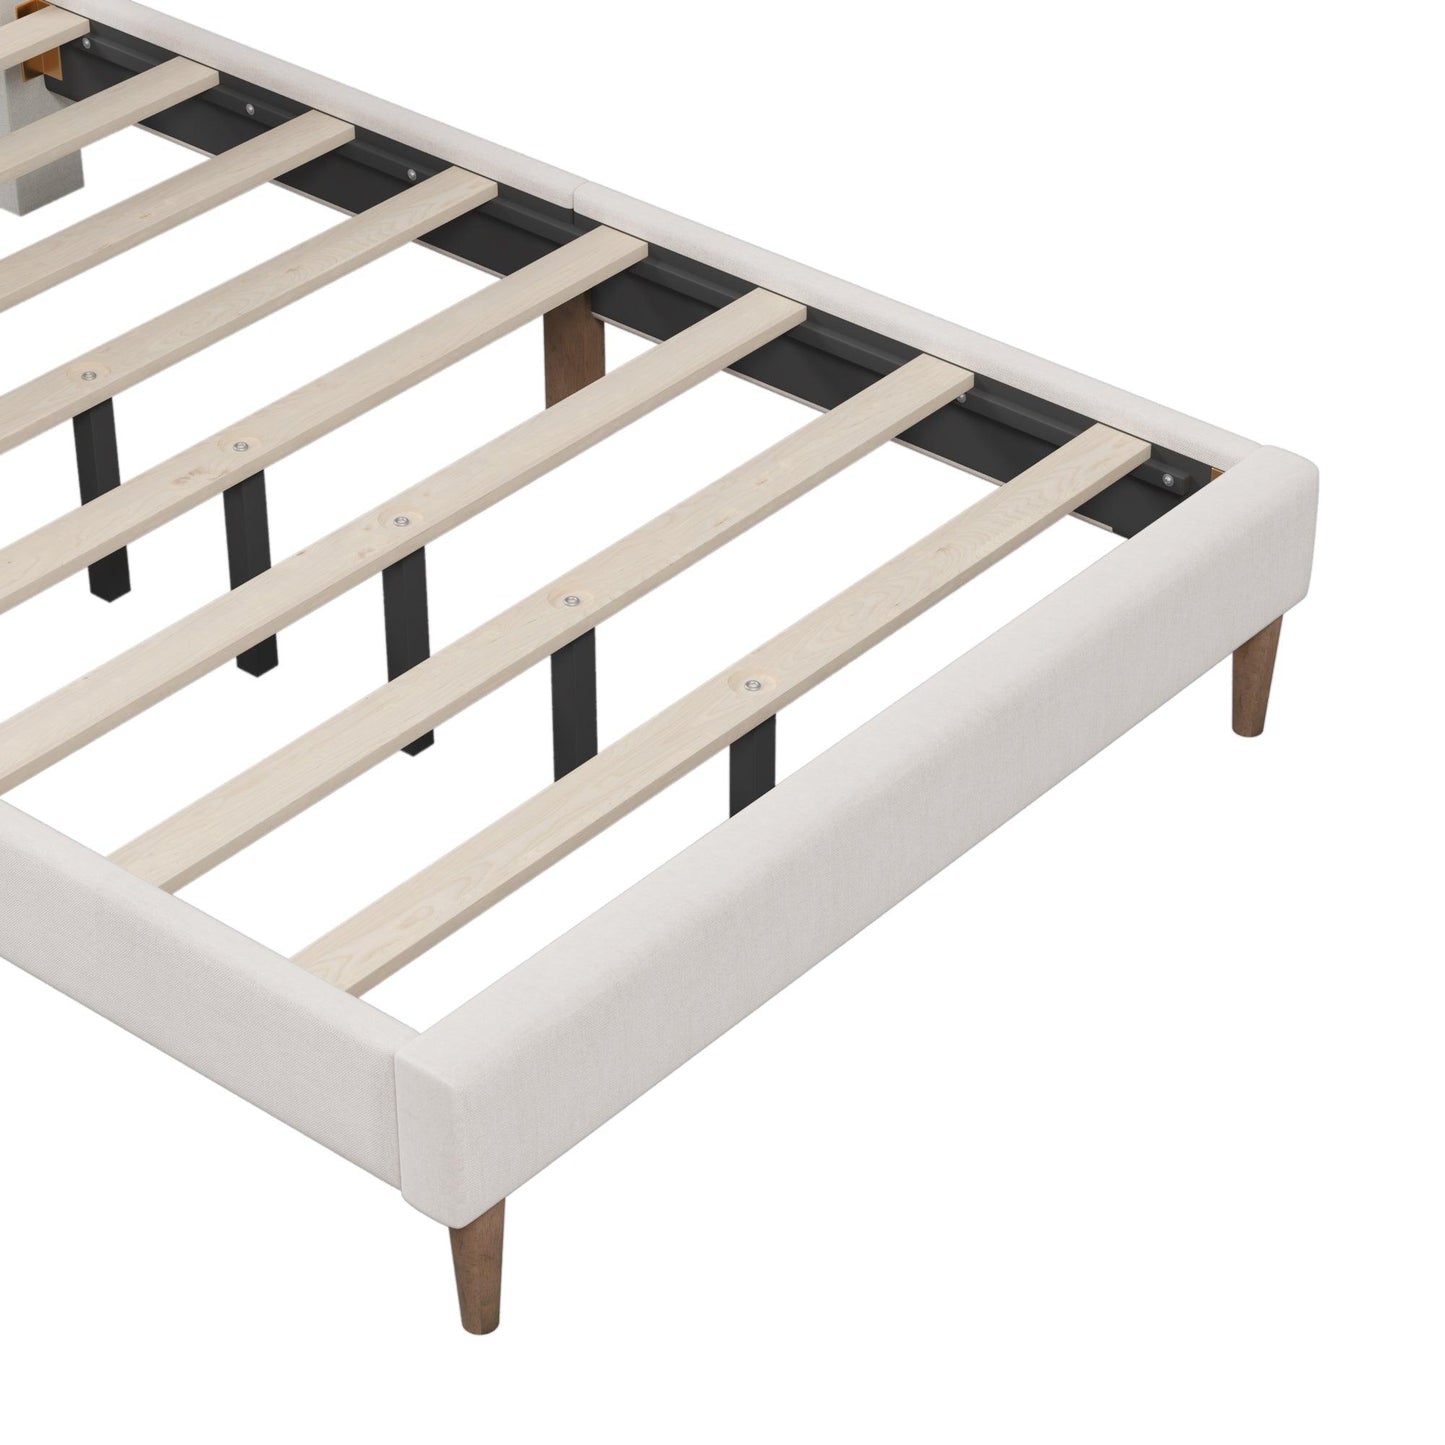 Upholstered Platform Bed Frame with Vertical Channel Tufted Headboard No Box Spring Needed Full Cream - FurniFindUSA